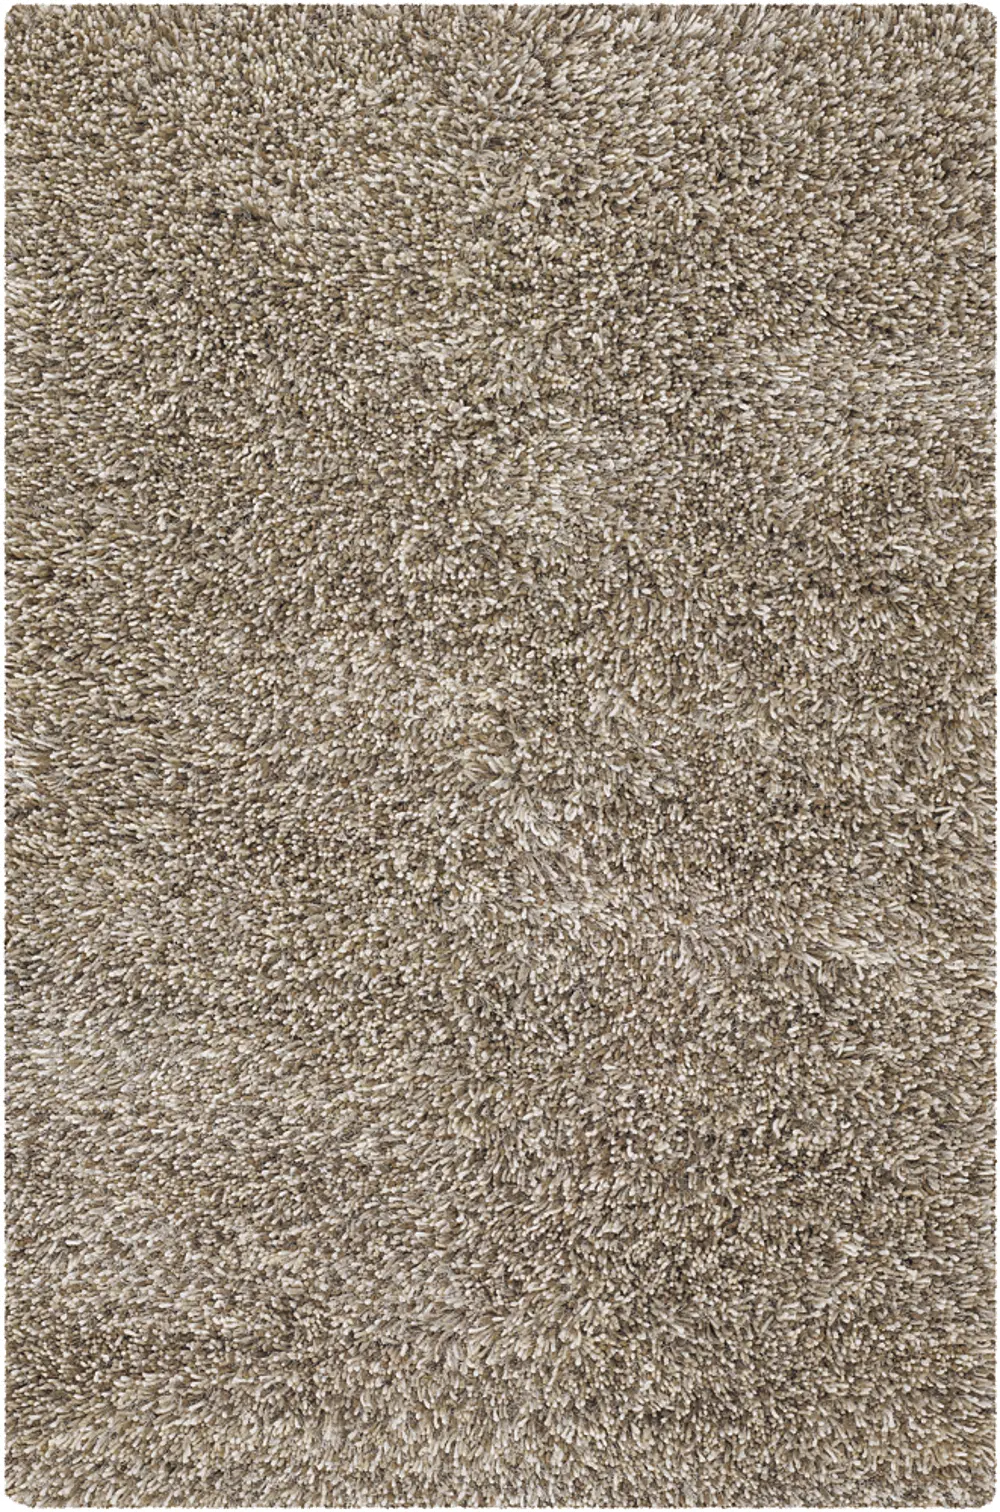 8 x 11 Large Contemporary Taupe and Ivory Area Rug - Estilo-1